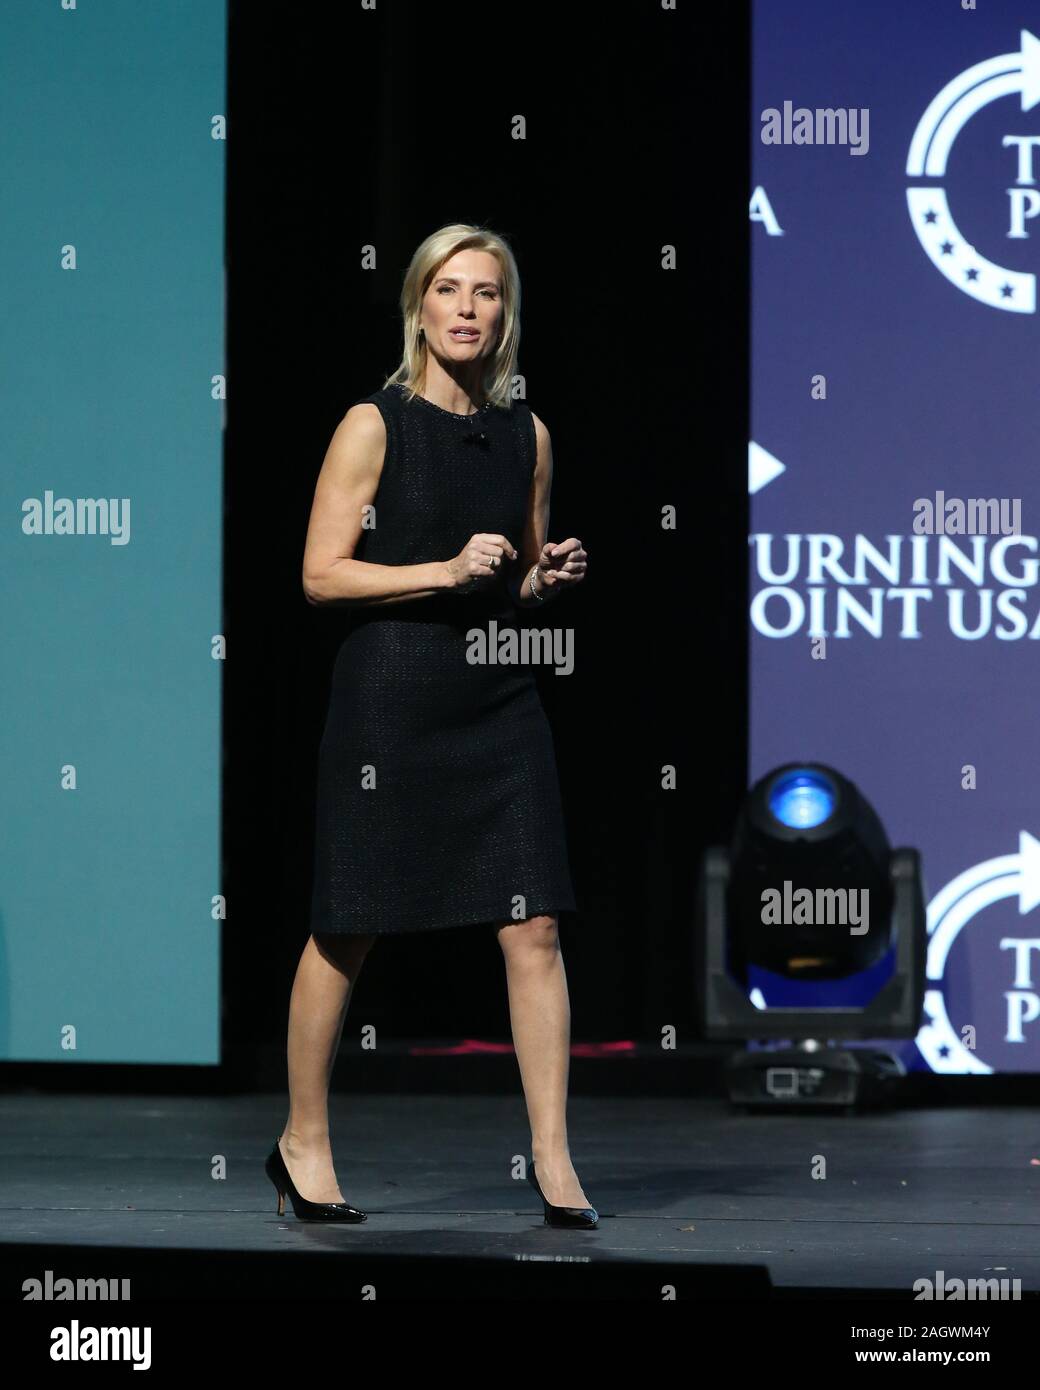 Florida, USA. 21 December 2019. Laura Ingraham speaks at the 2019 Turning Point USA Student Action Summit - Day 3 at the Palm Beach County Convention Center on December 21, 2019 in West Palm Beach, Florida. People: Laura Ingraham Credit: Storms Media Group/Alamy Live News Stock Photo